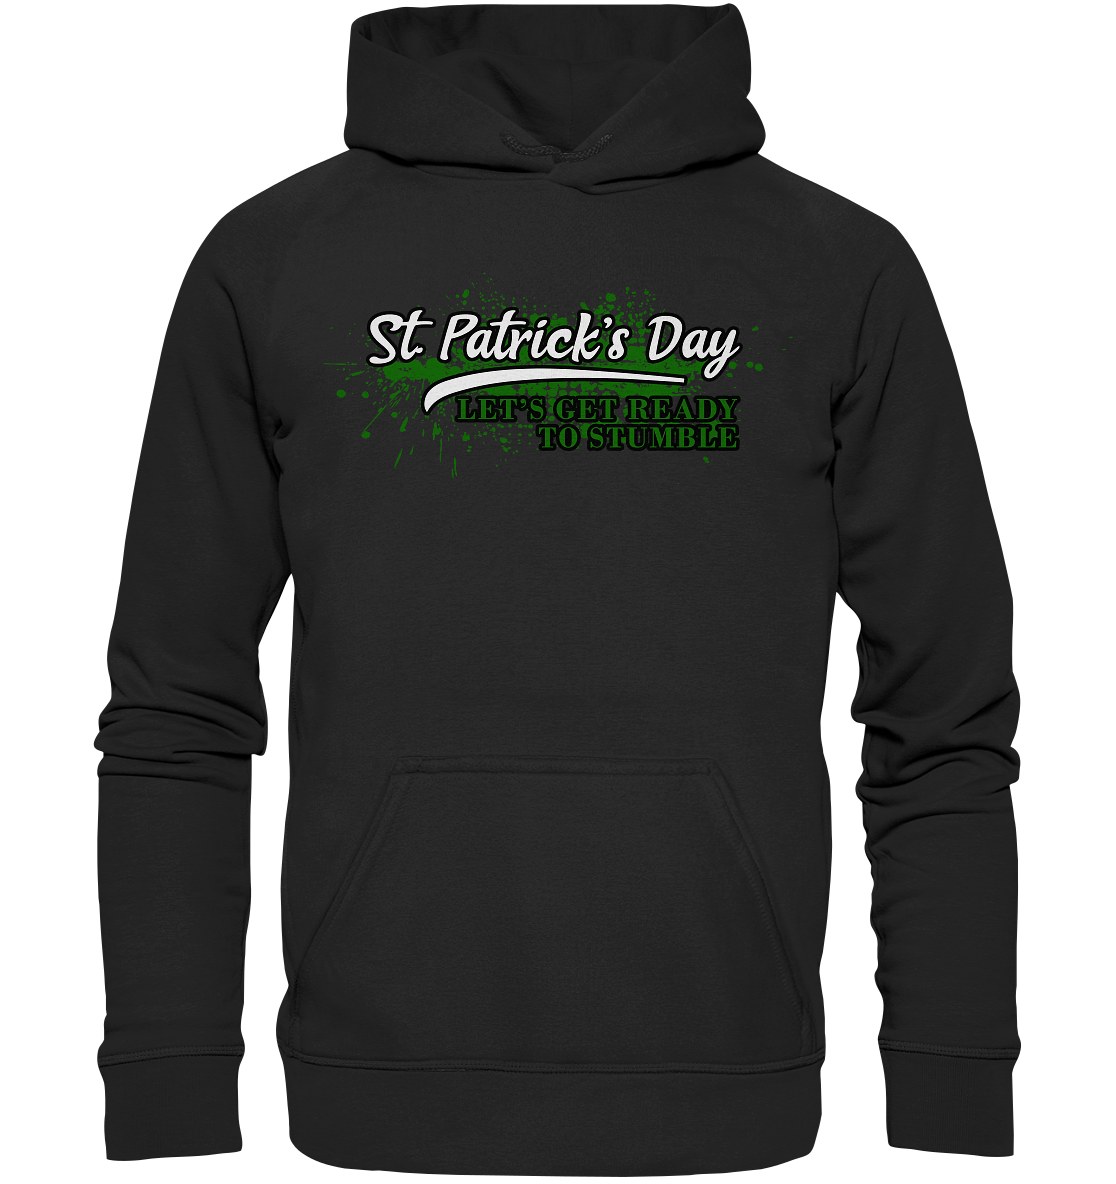 St. Patrick's Day "Let's Get Ready To Stumble" - Basic Unisex Hoodie